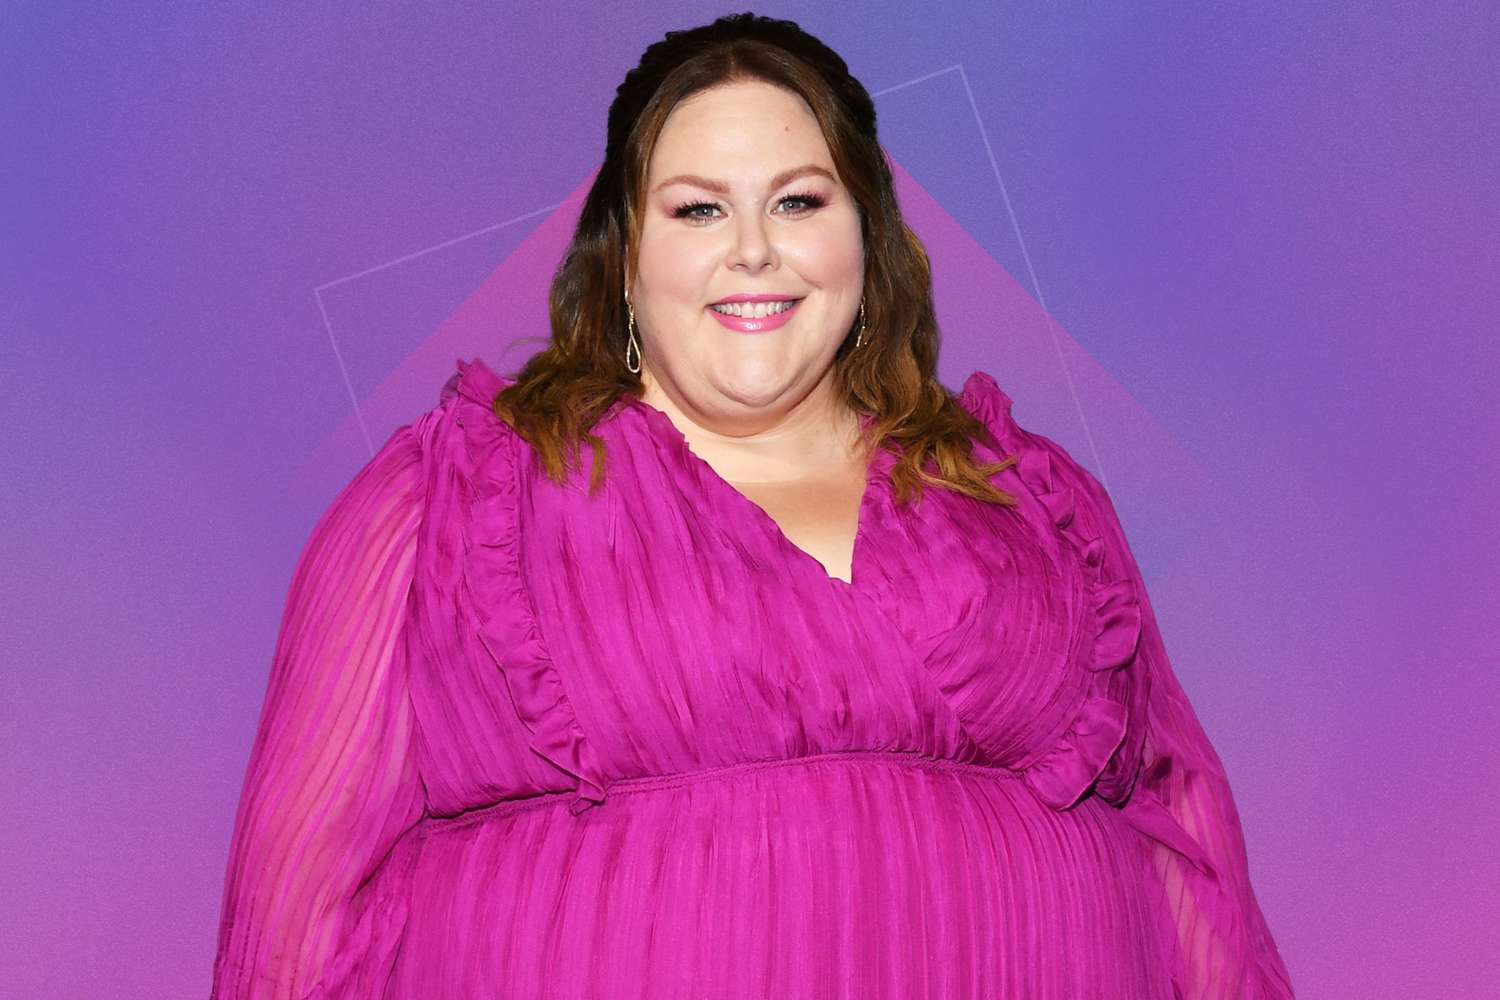 Chrissy Metz against a purple background